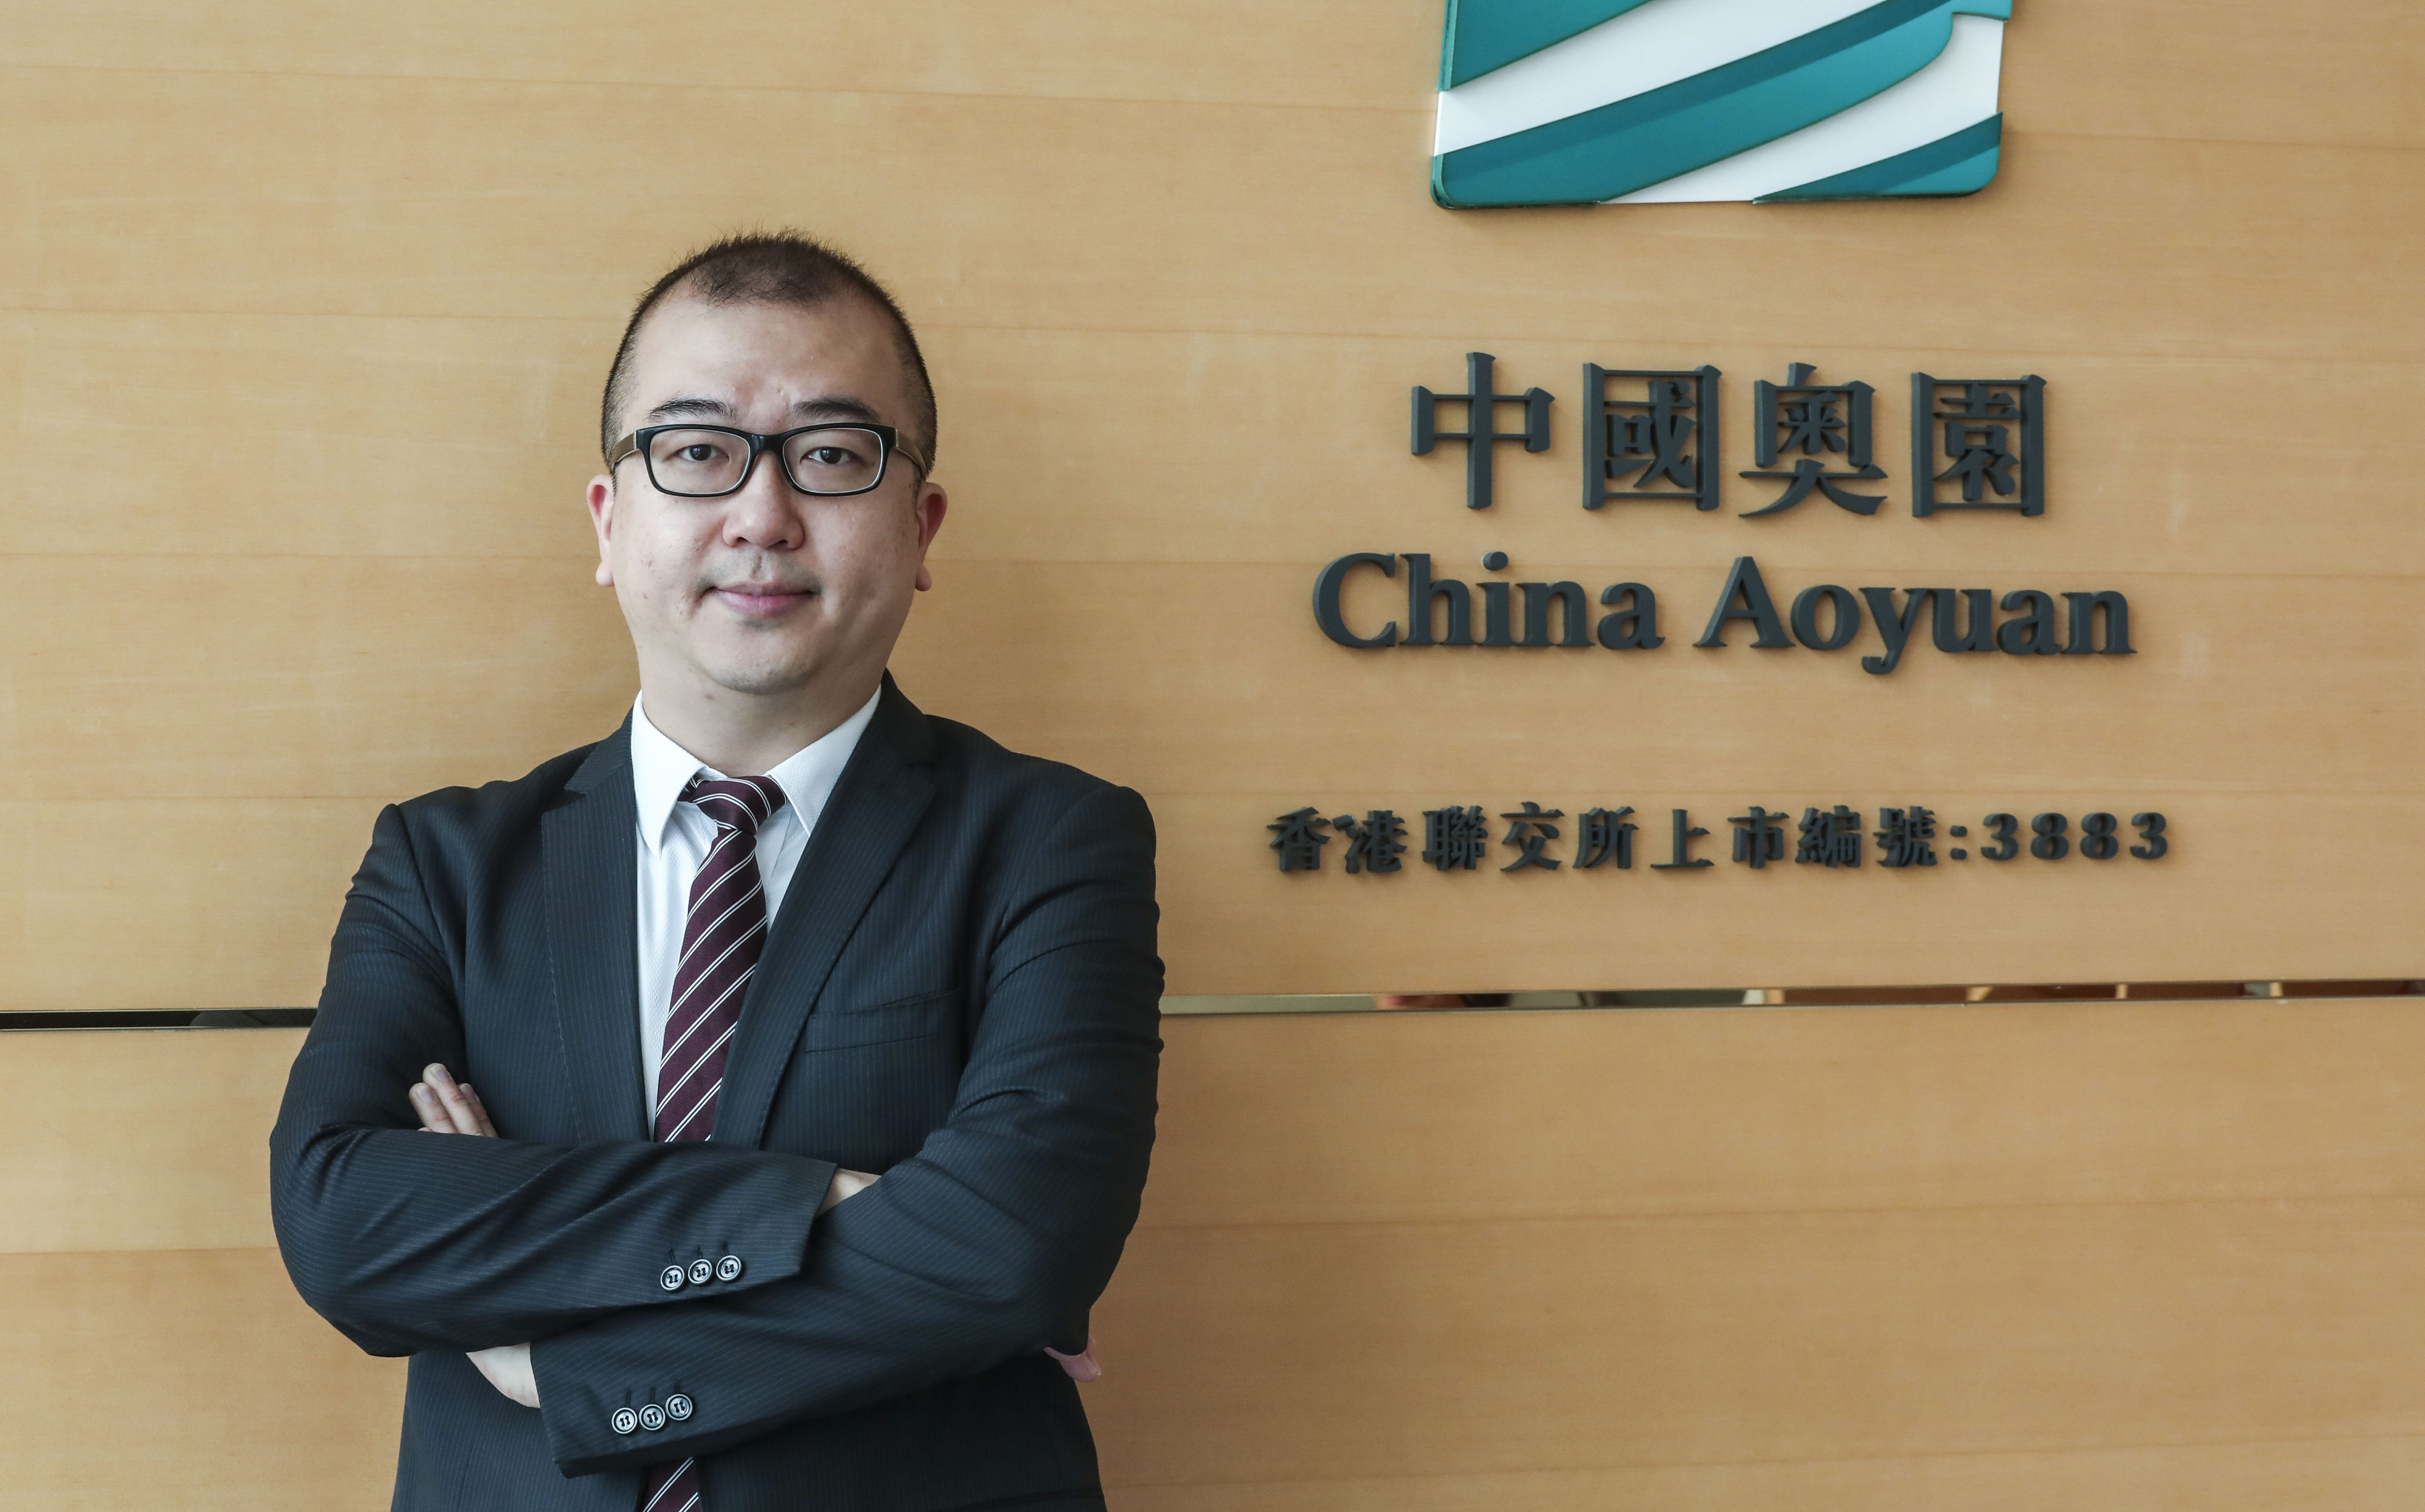 China Aoyuan has been struggling under the weight of its debt and had filed for Chapter 15 bankruptcy in New York last month. Photo: Jonathan Wong